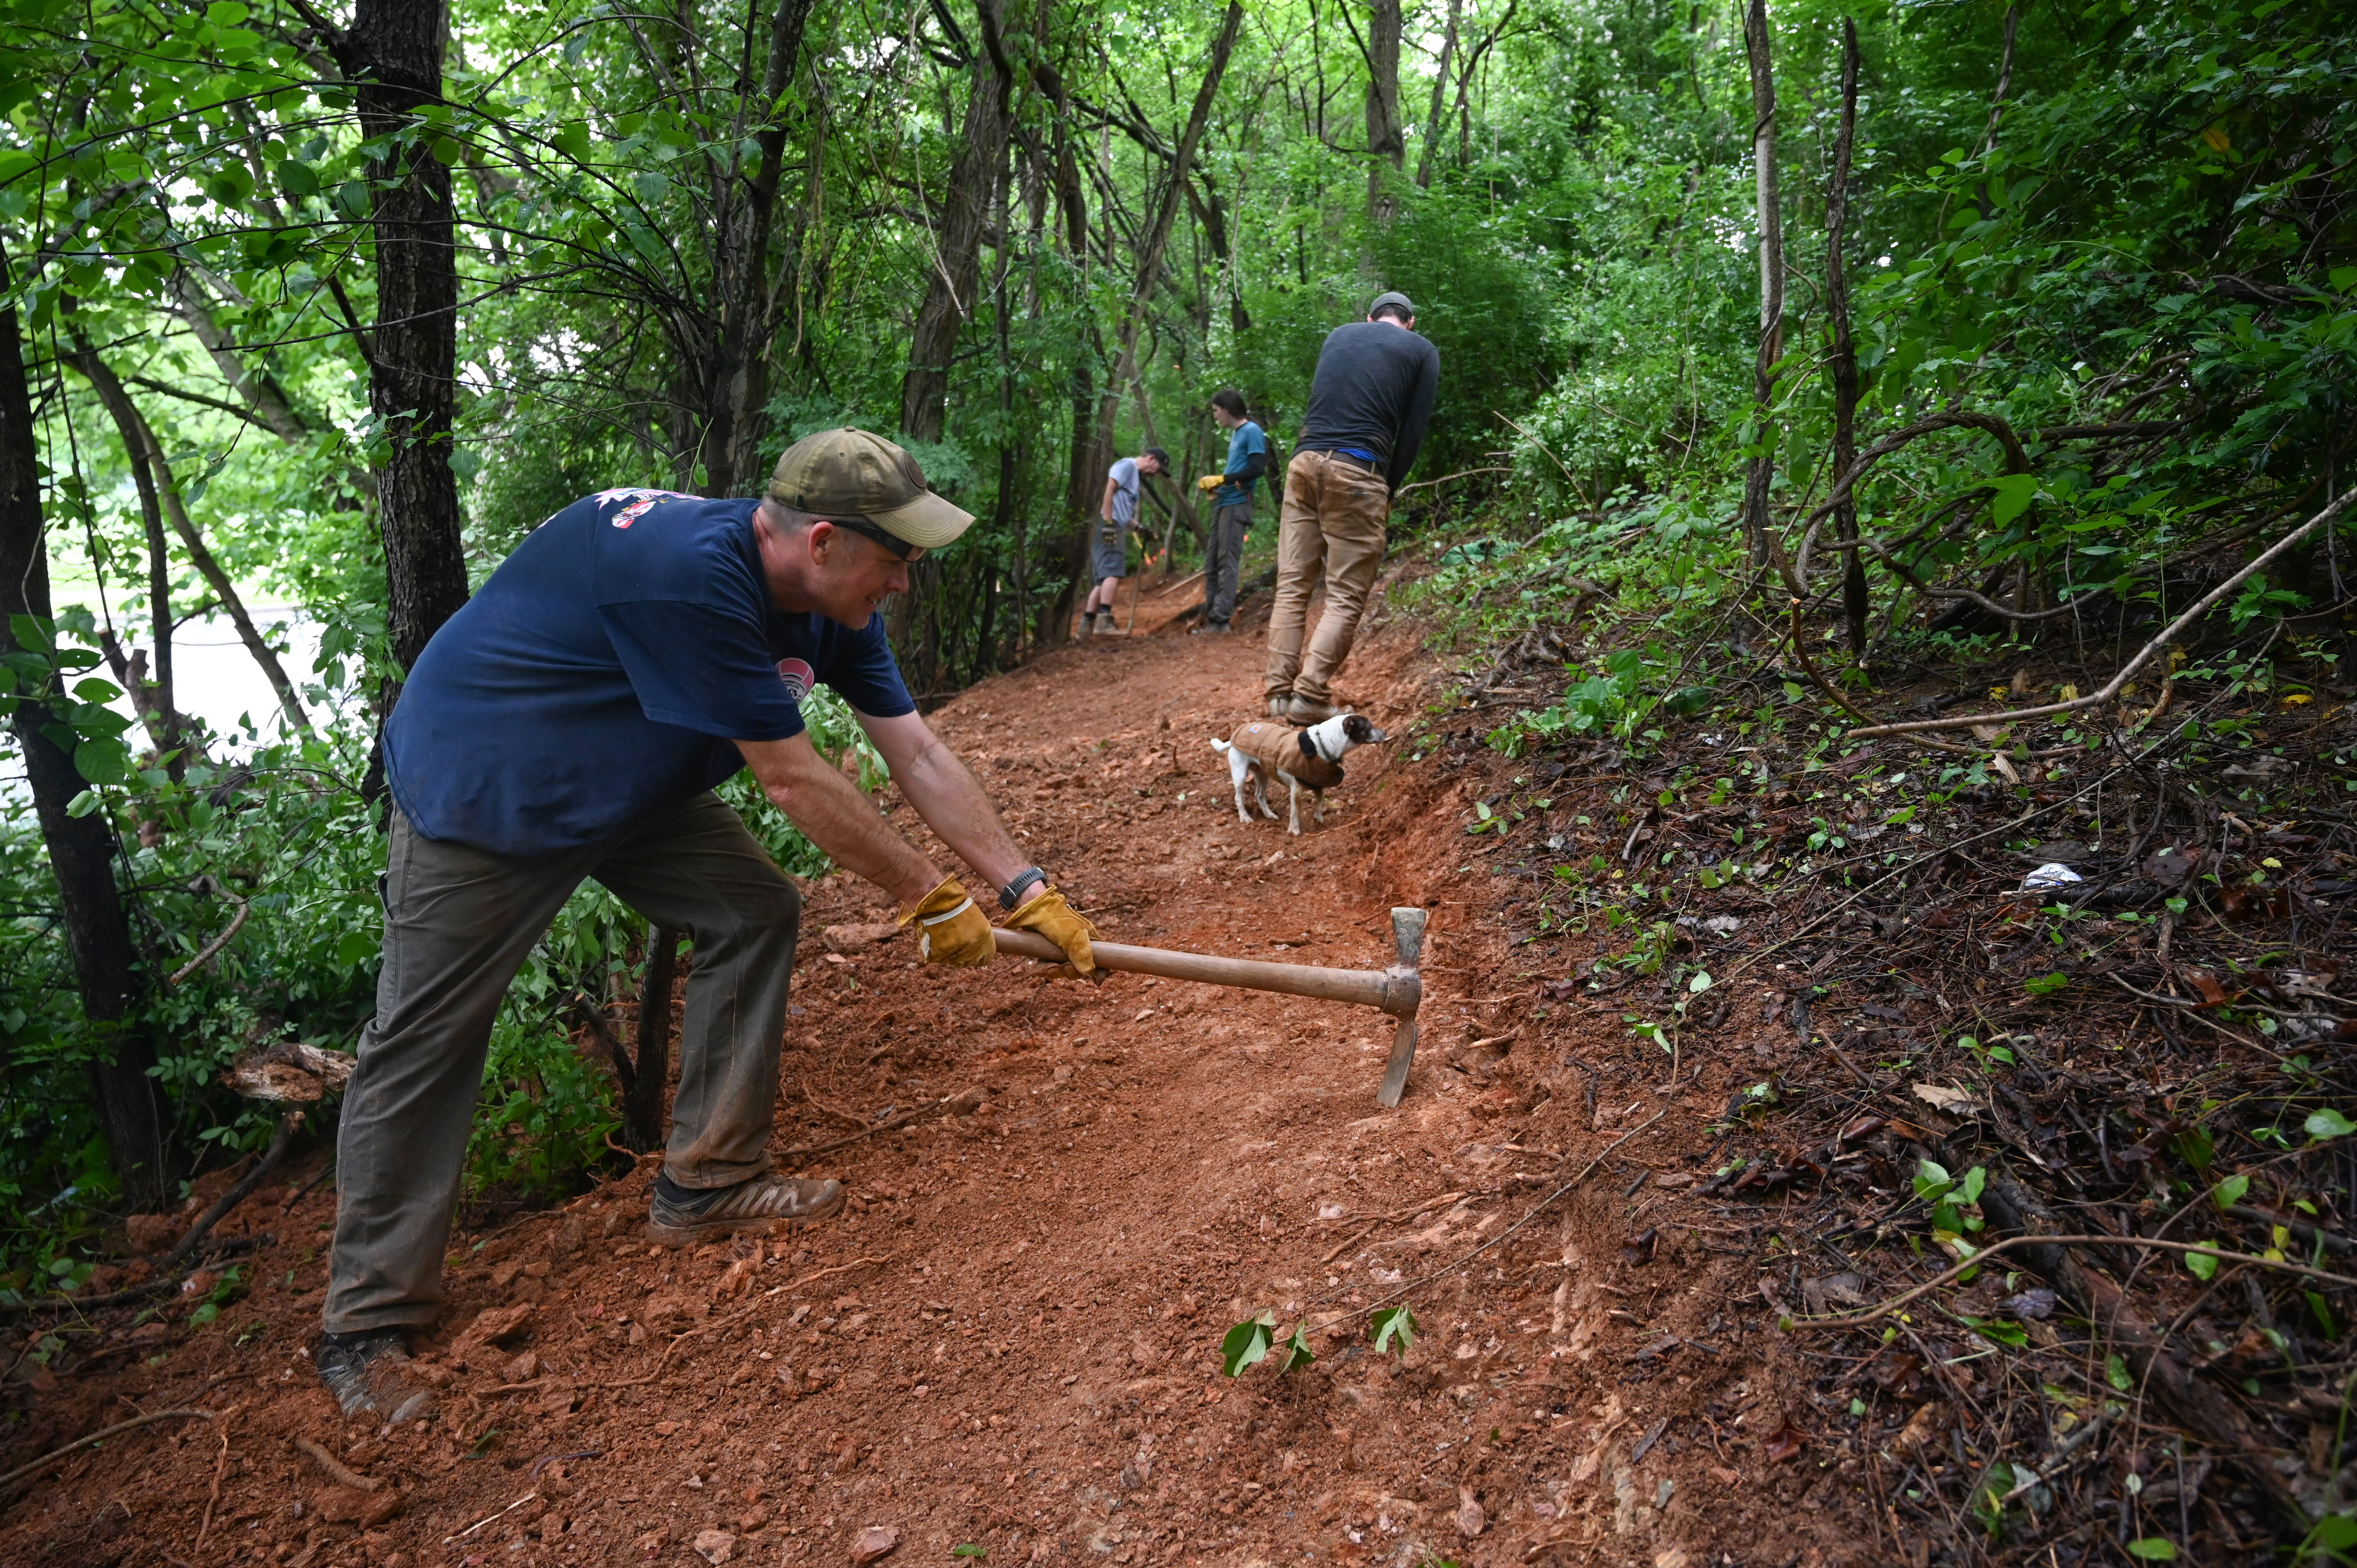 Patrick Ellis, trail liaison, works with a group of other volunteers as they make progress in the creation of a new bike trail, Windy Ridge Trails, at Mount Airy's East West Park on Saturday. (Brian Krista/staff photo)